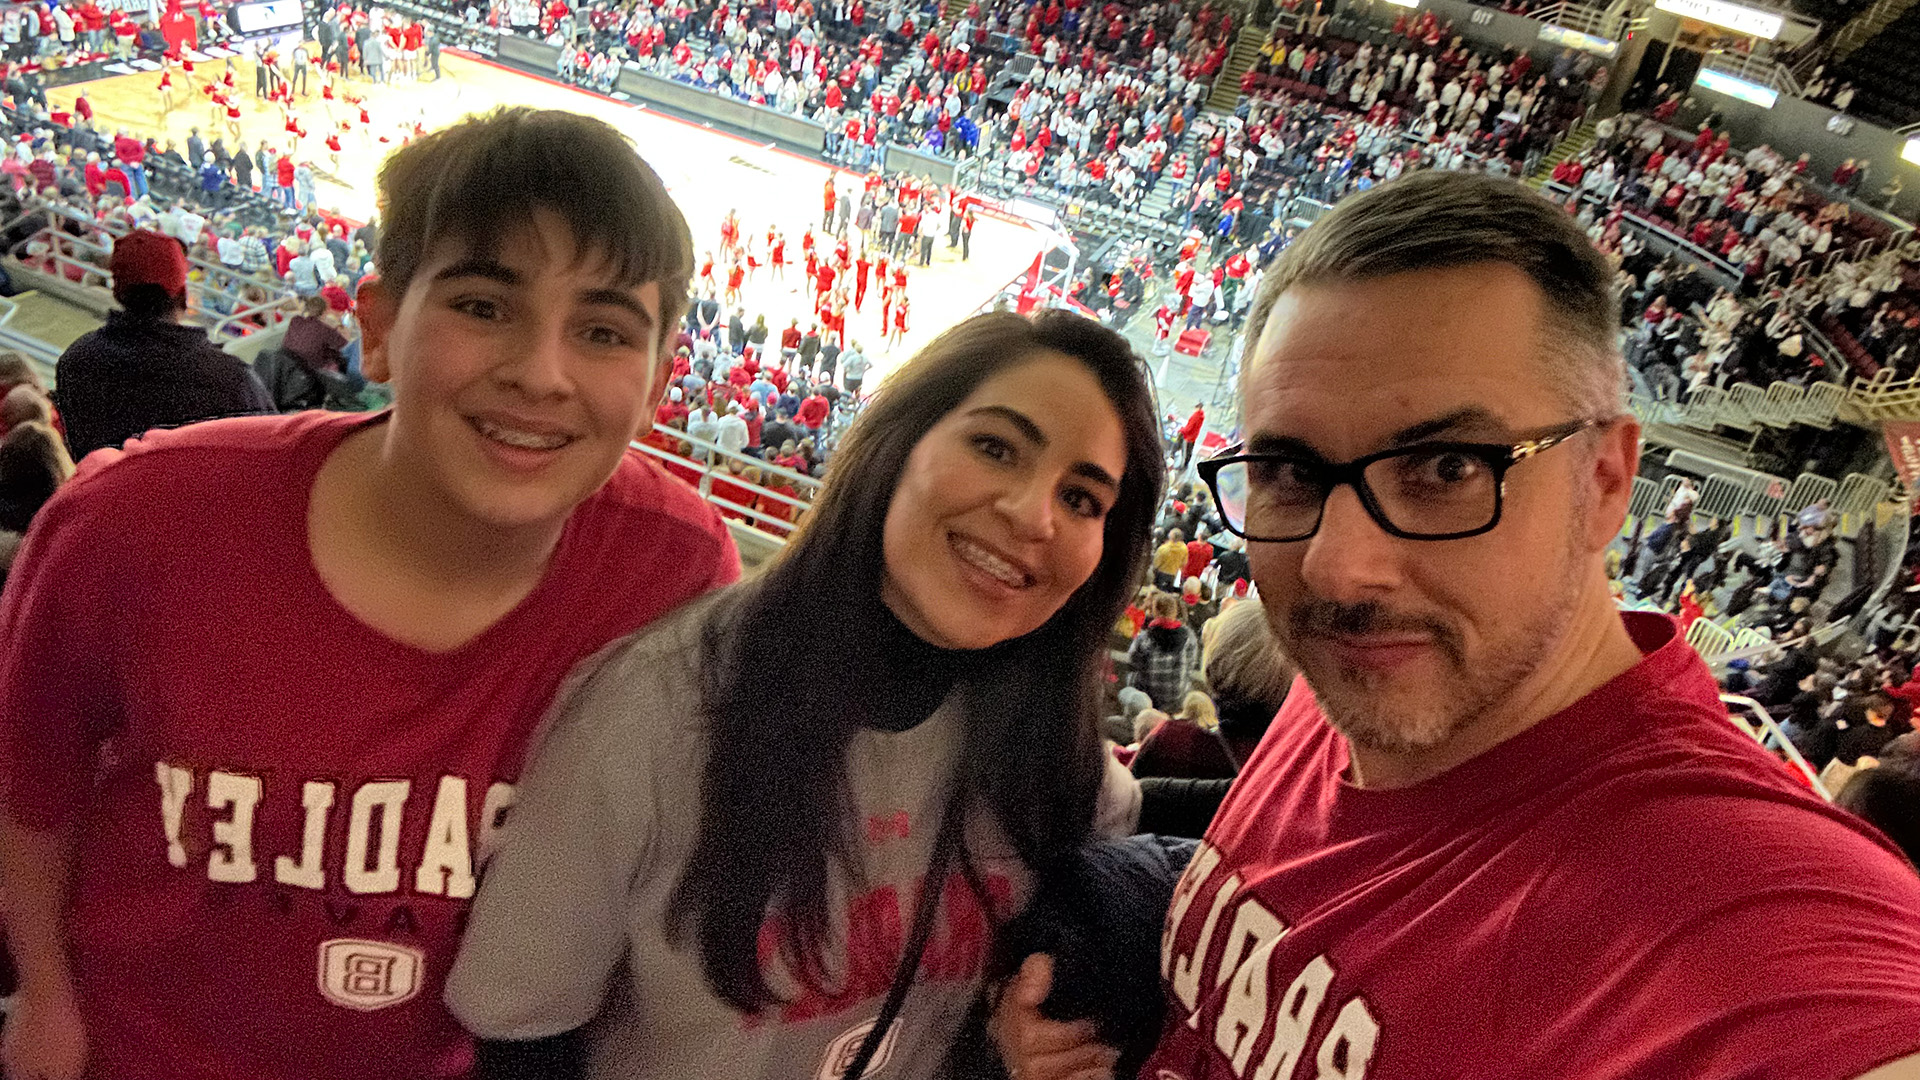 Alexandre Chequim, co-founder and CEO of DigiFarmz Smart Agriculture, attends a Bradley basketball game with his wife, Caroline, and son, Alex